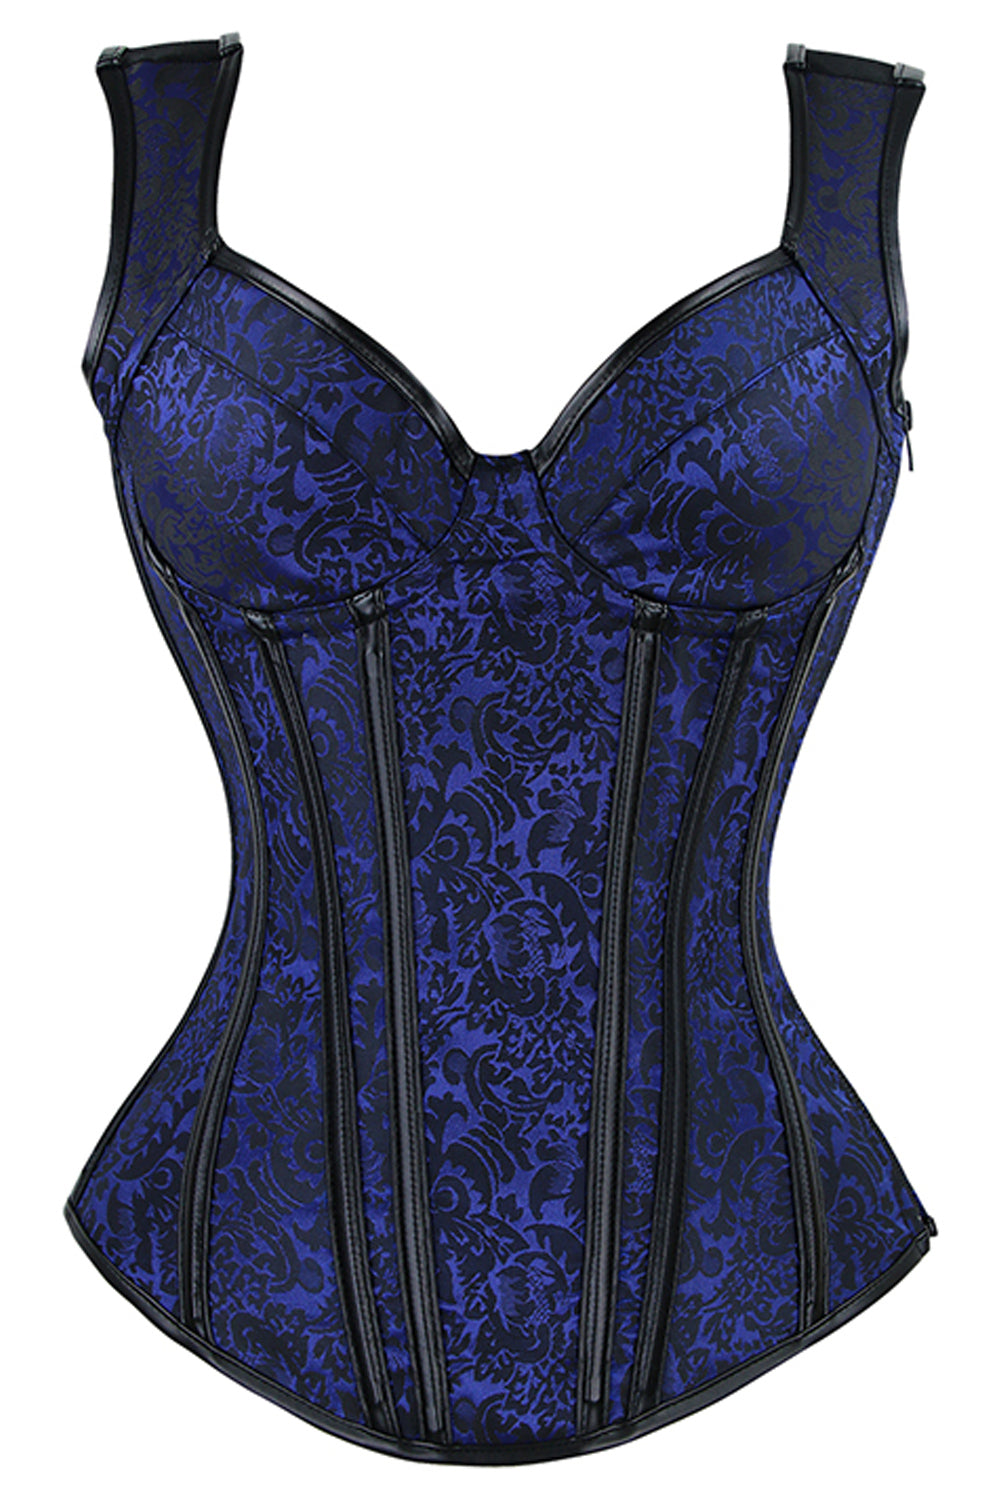 Atomic Electric Blue Steel Boned Steam Overbust Corset